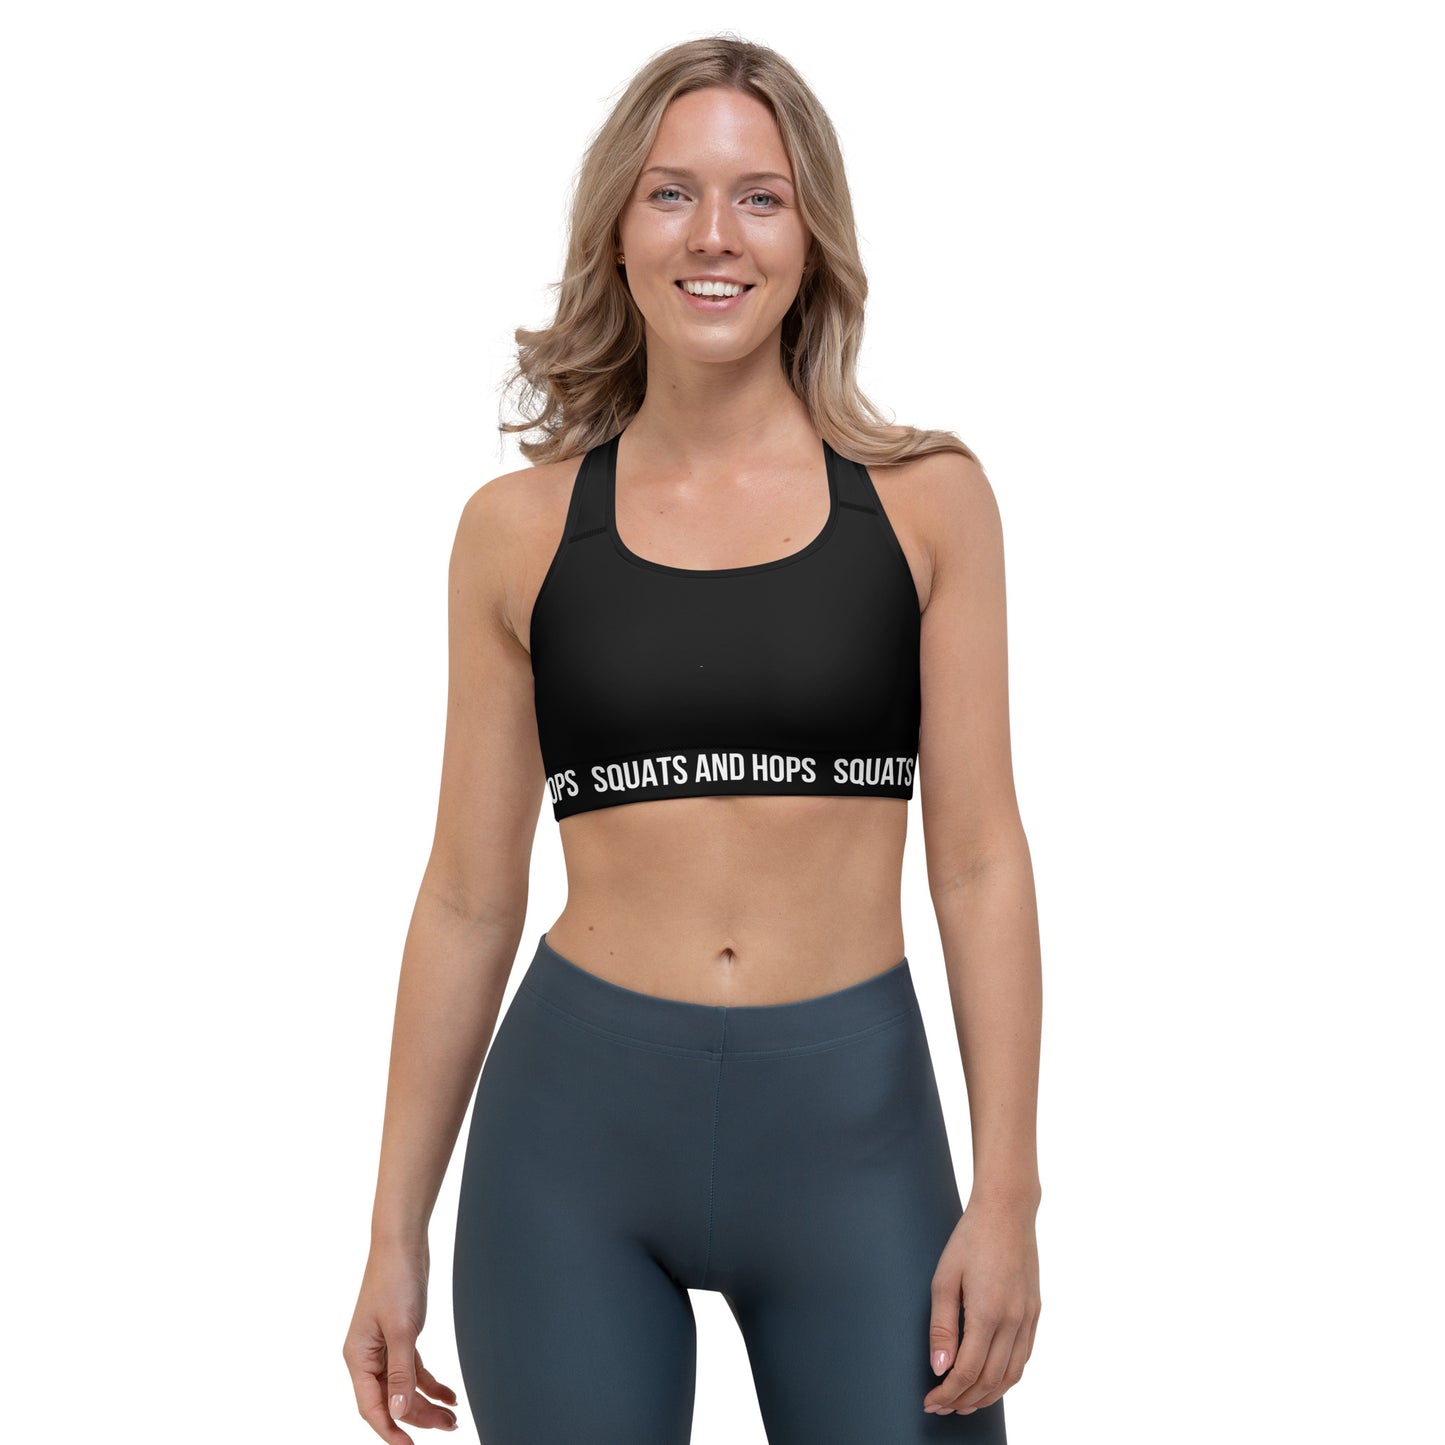 S&H Repeating Sports Bra